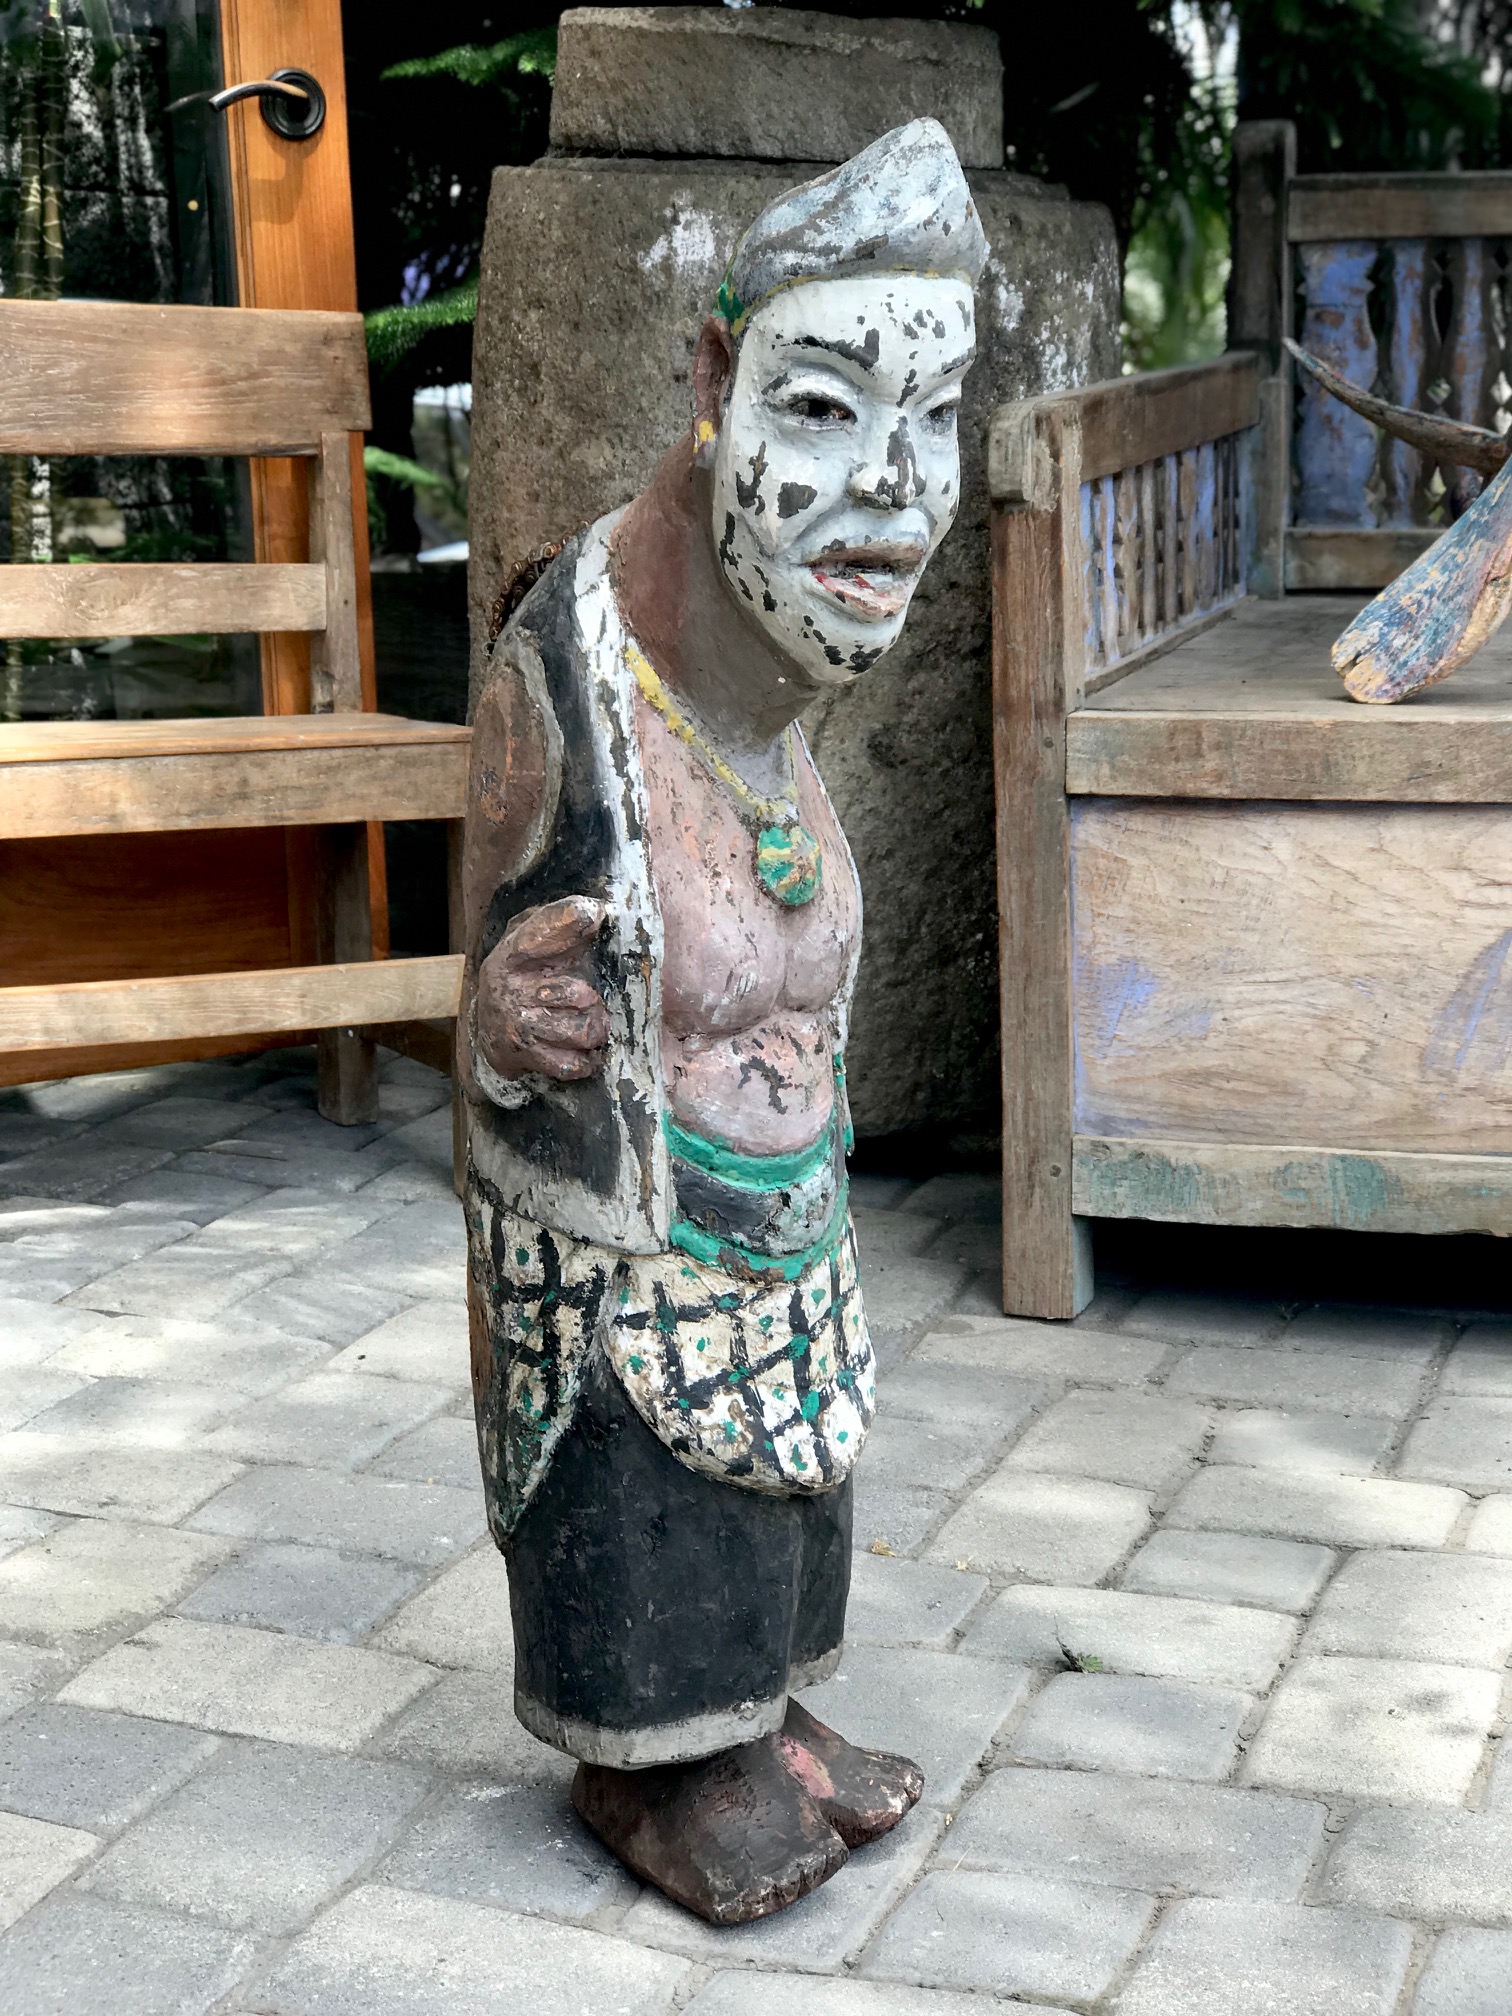 Tribal Musical Instrument, Slit Drum/Gong, depicting Semar and important Javanese God/clown, Indonesia, wood, paint, bicycle chain handle, This type of percussion instrument was developed and used by people in forested areas as its sound will carry far through the surrounding jungle and rice fields. Often hung or placed in a drum pavilion or tower and used to call villagers to meetings, or other events by tapping out a signal. 36" x 10" x 12", $750., thedavidalancollection.com , solana beach, ca